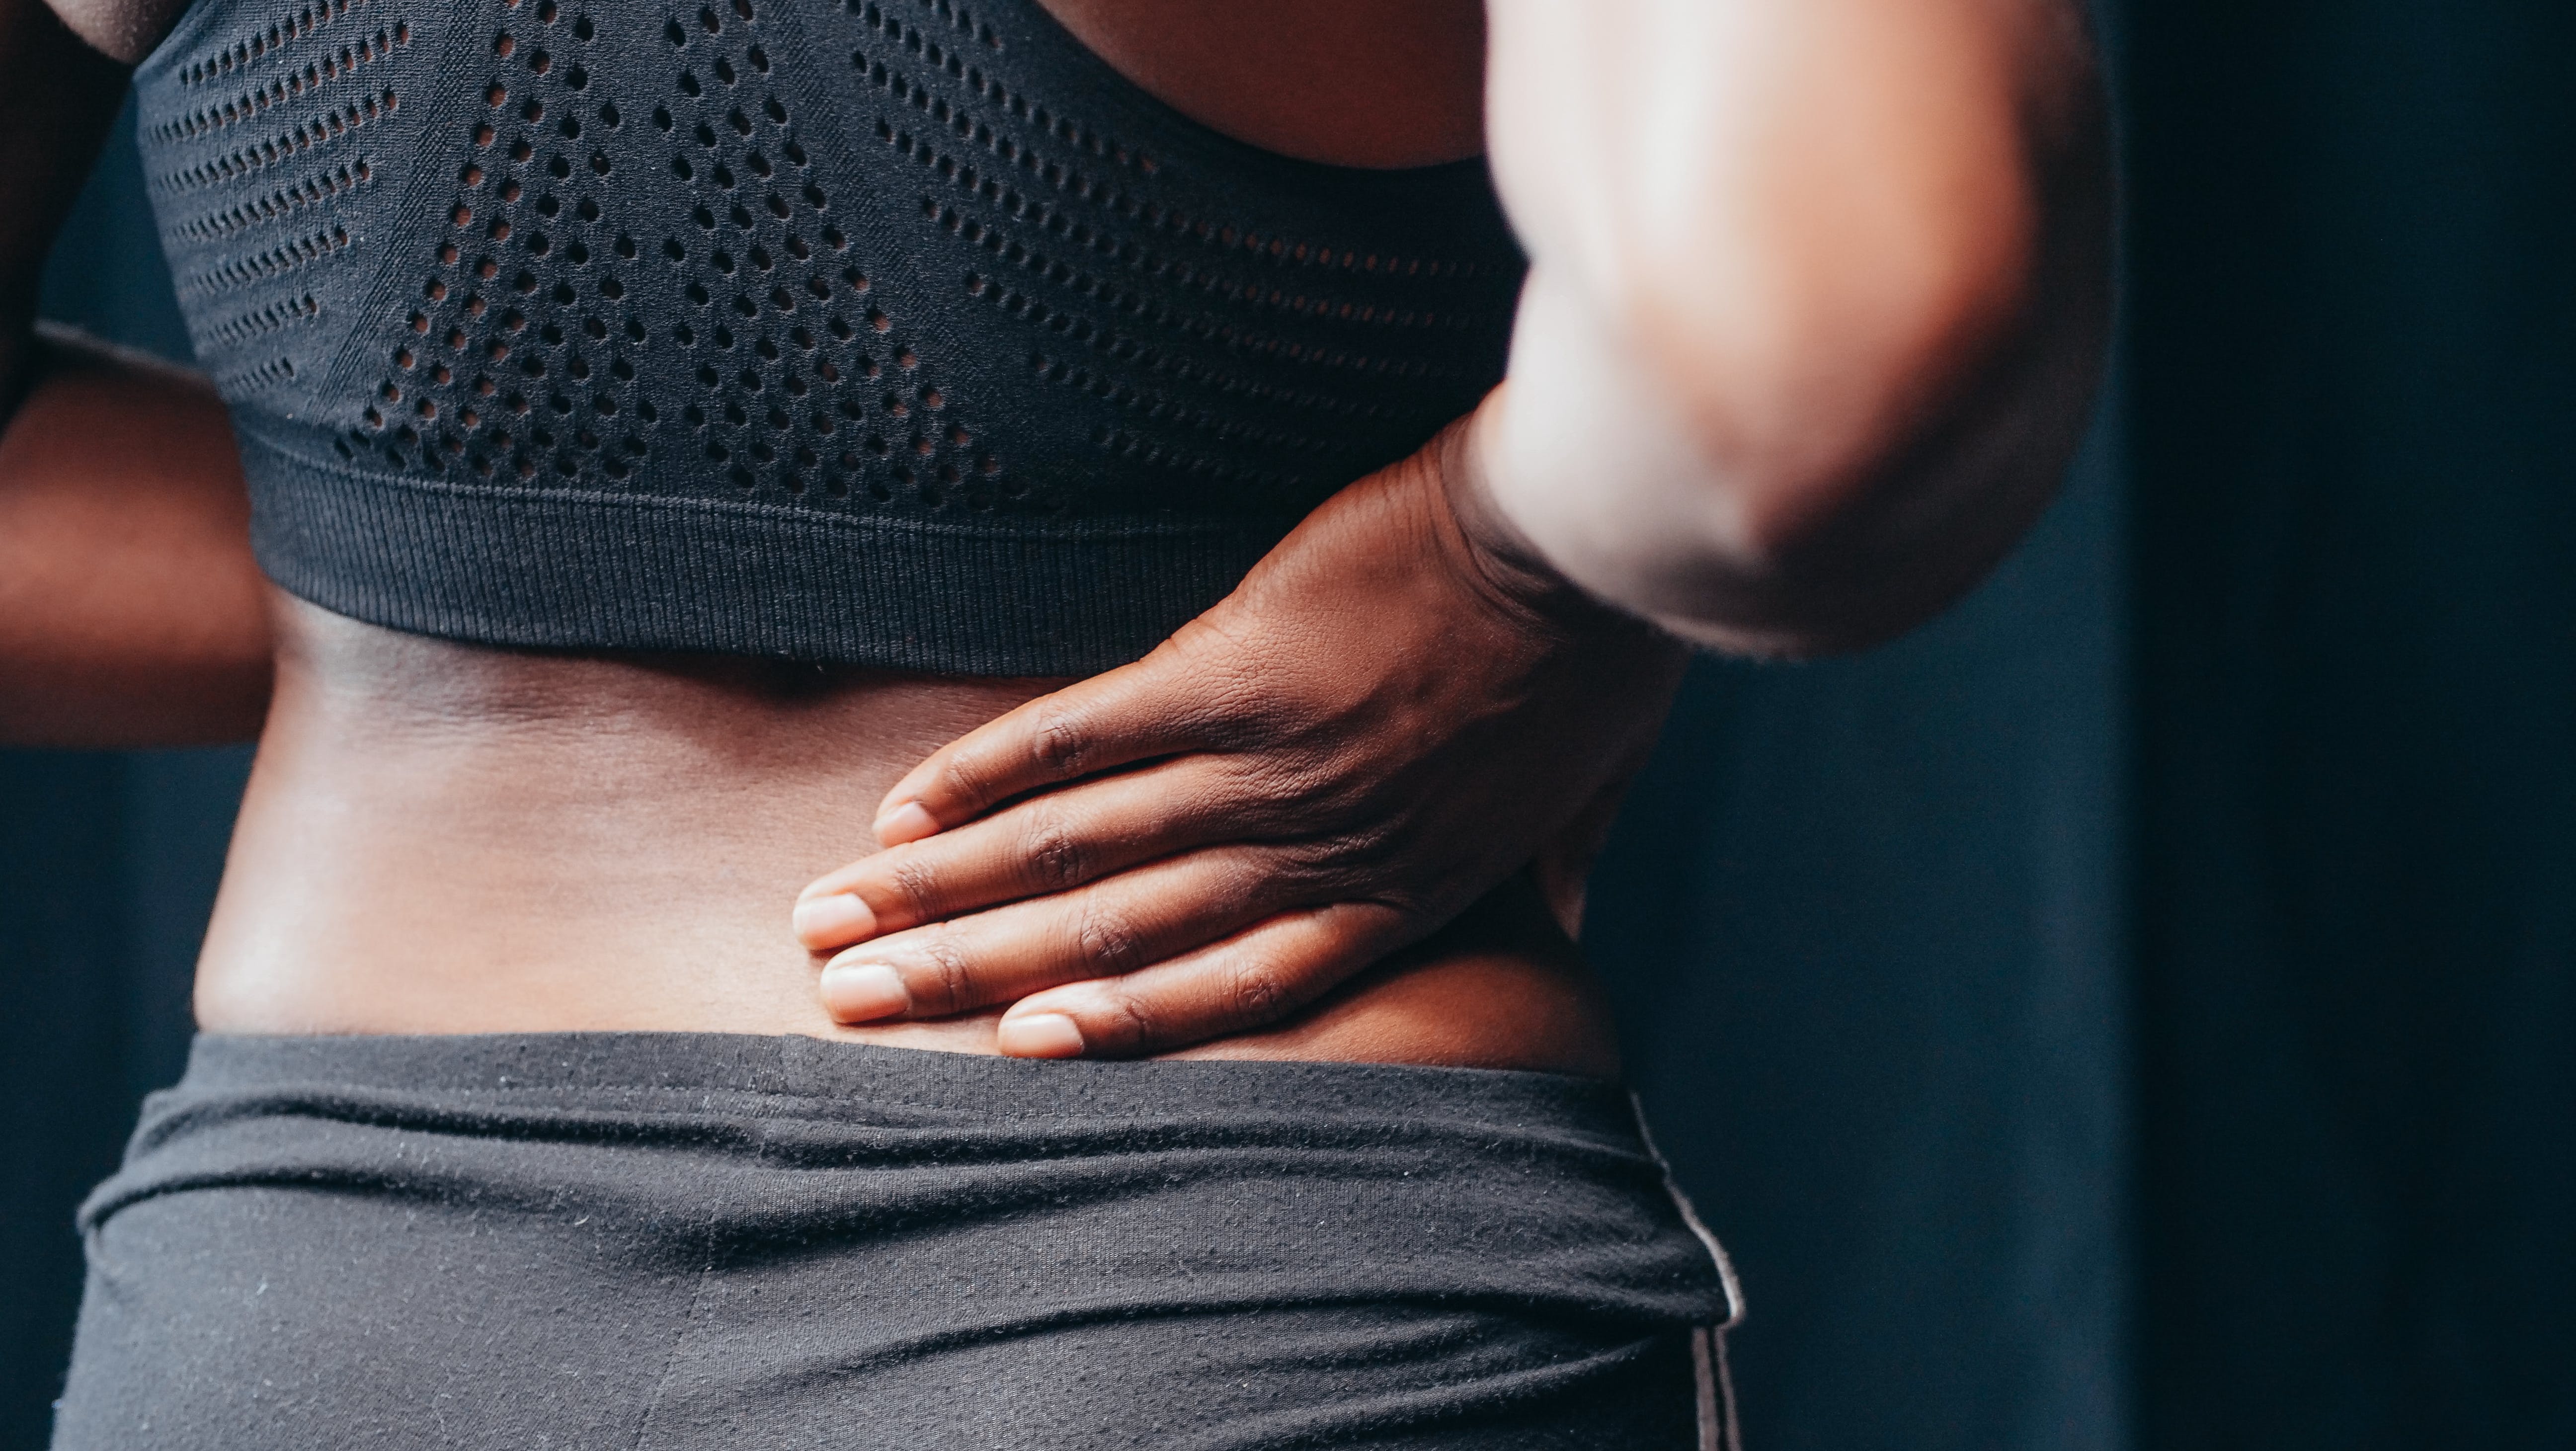 How Can Chiropractic Care for Back Pain Help Ease the Nagging Pain